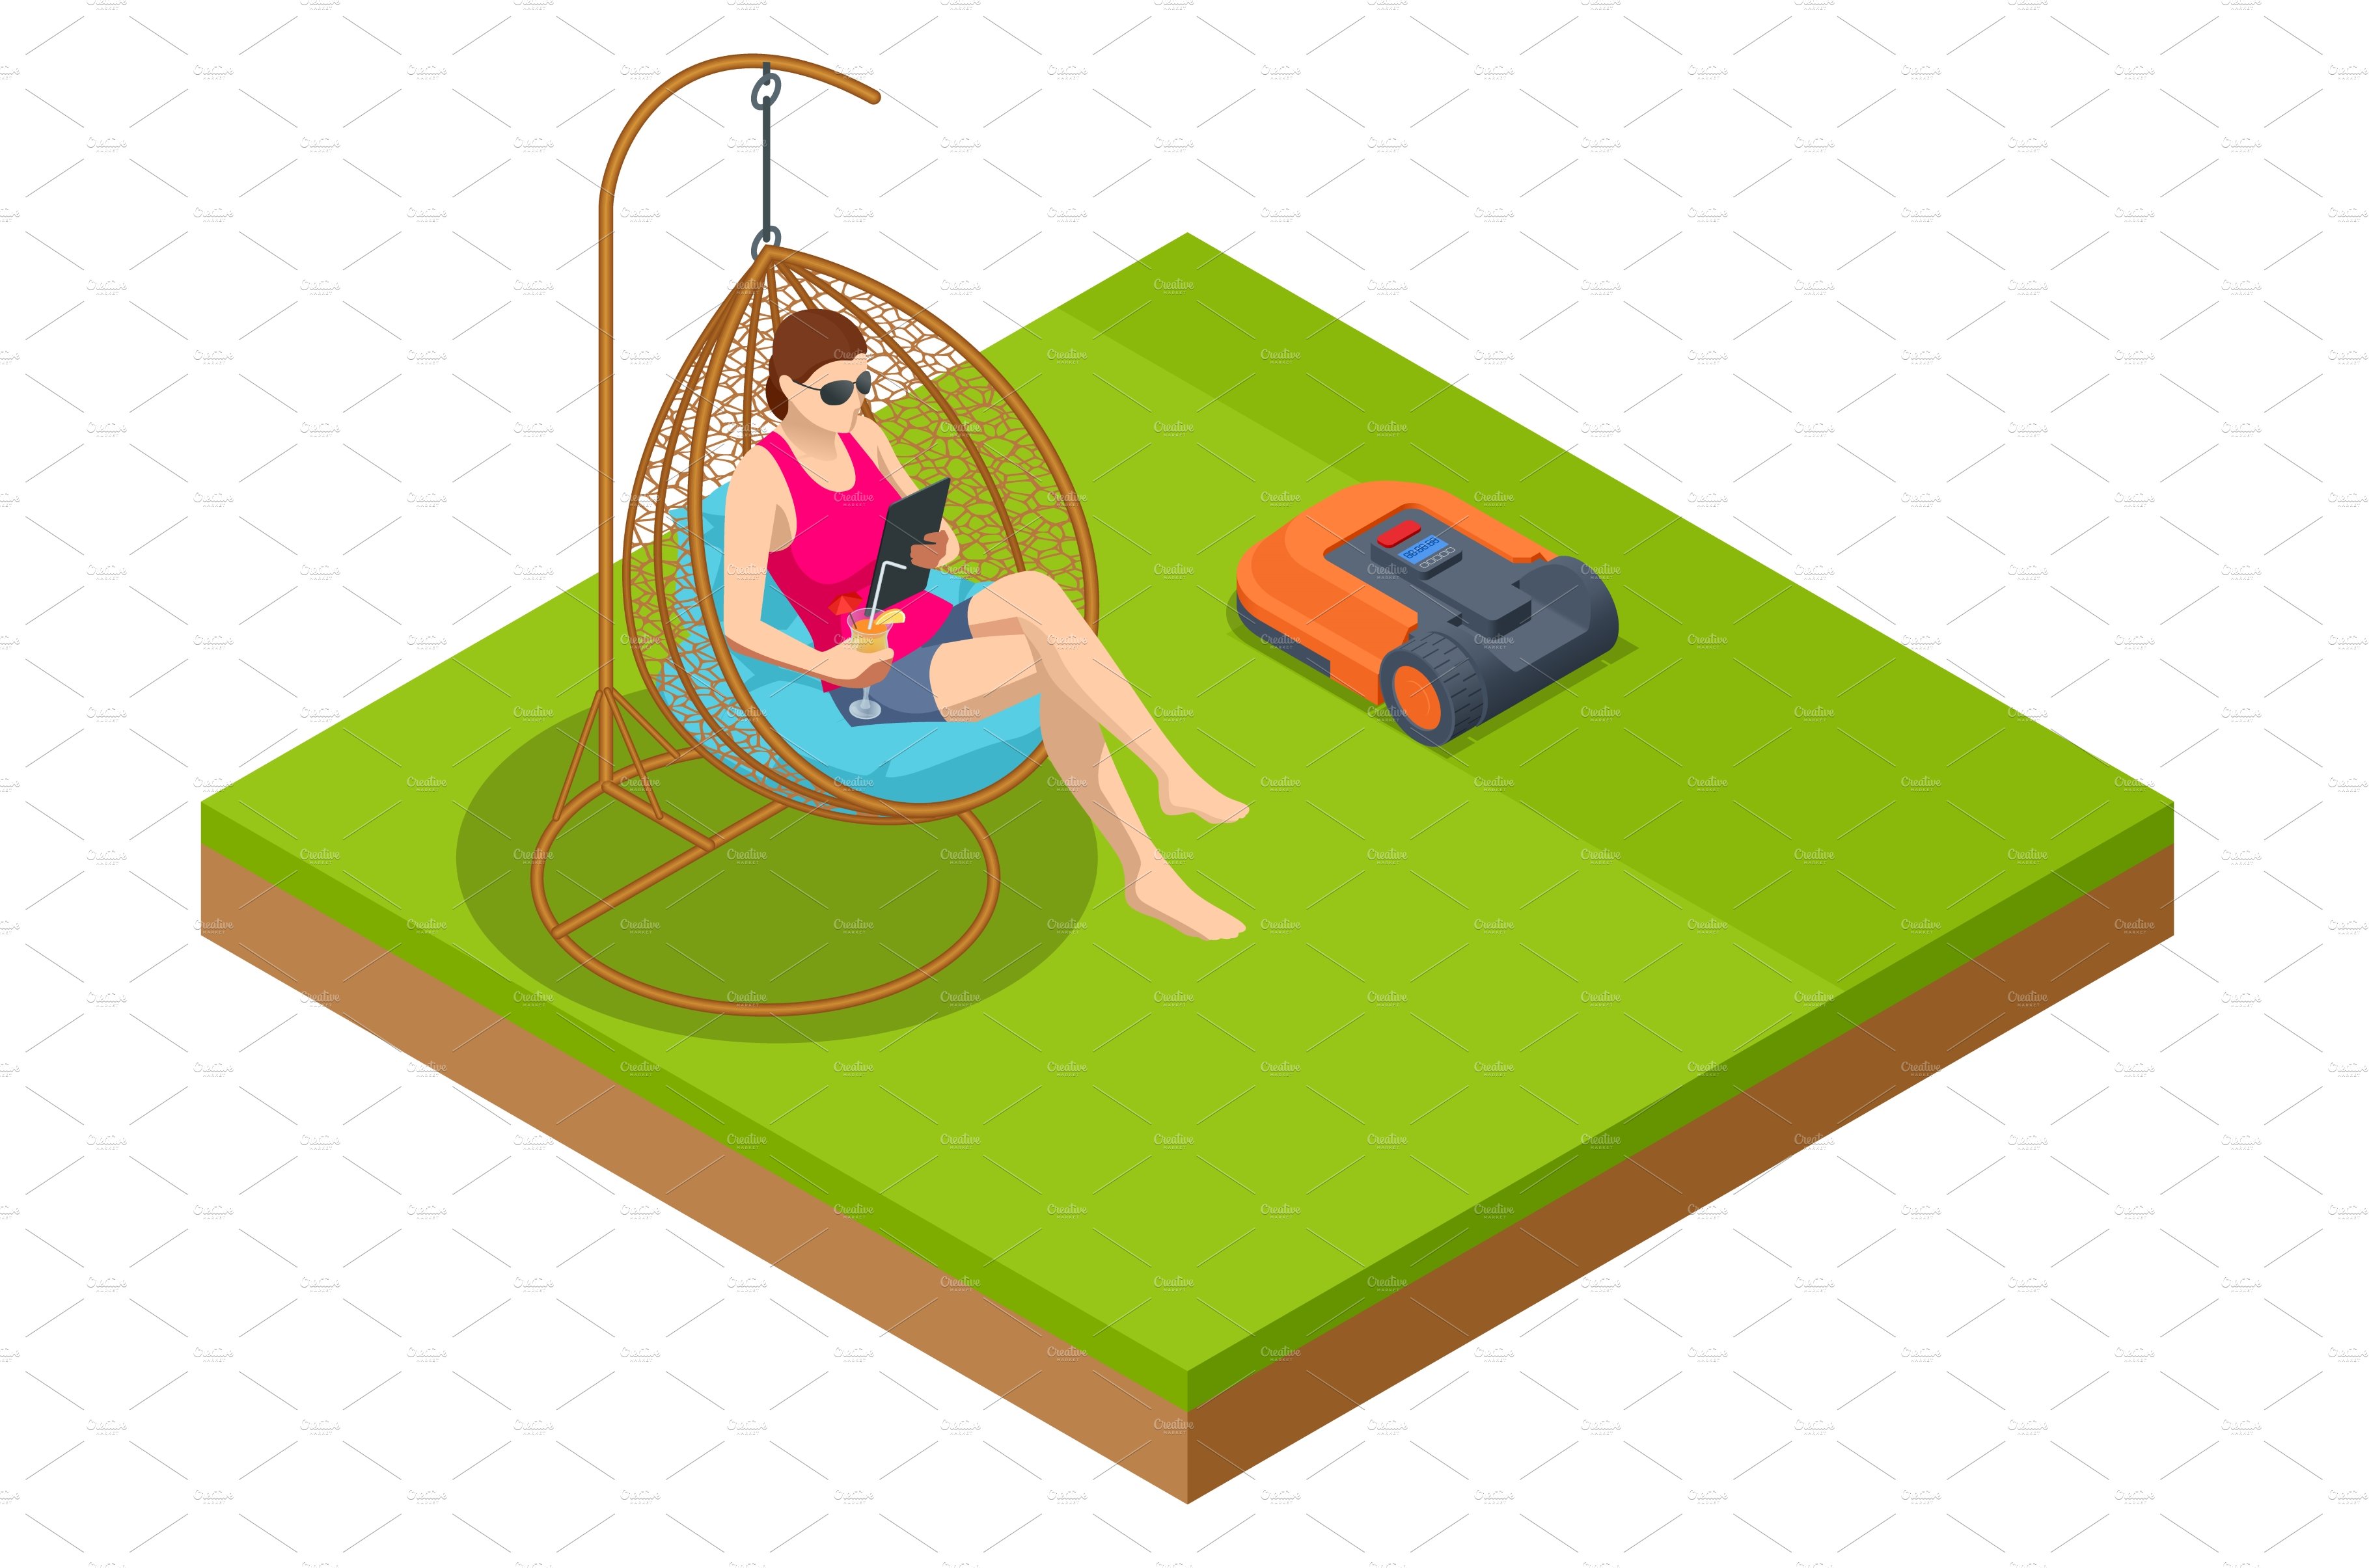 Isometric Robotic lawn mower on cover image.